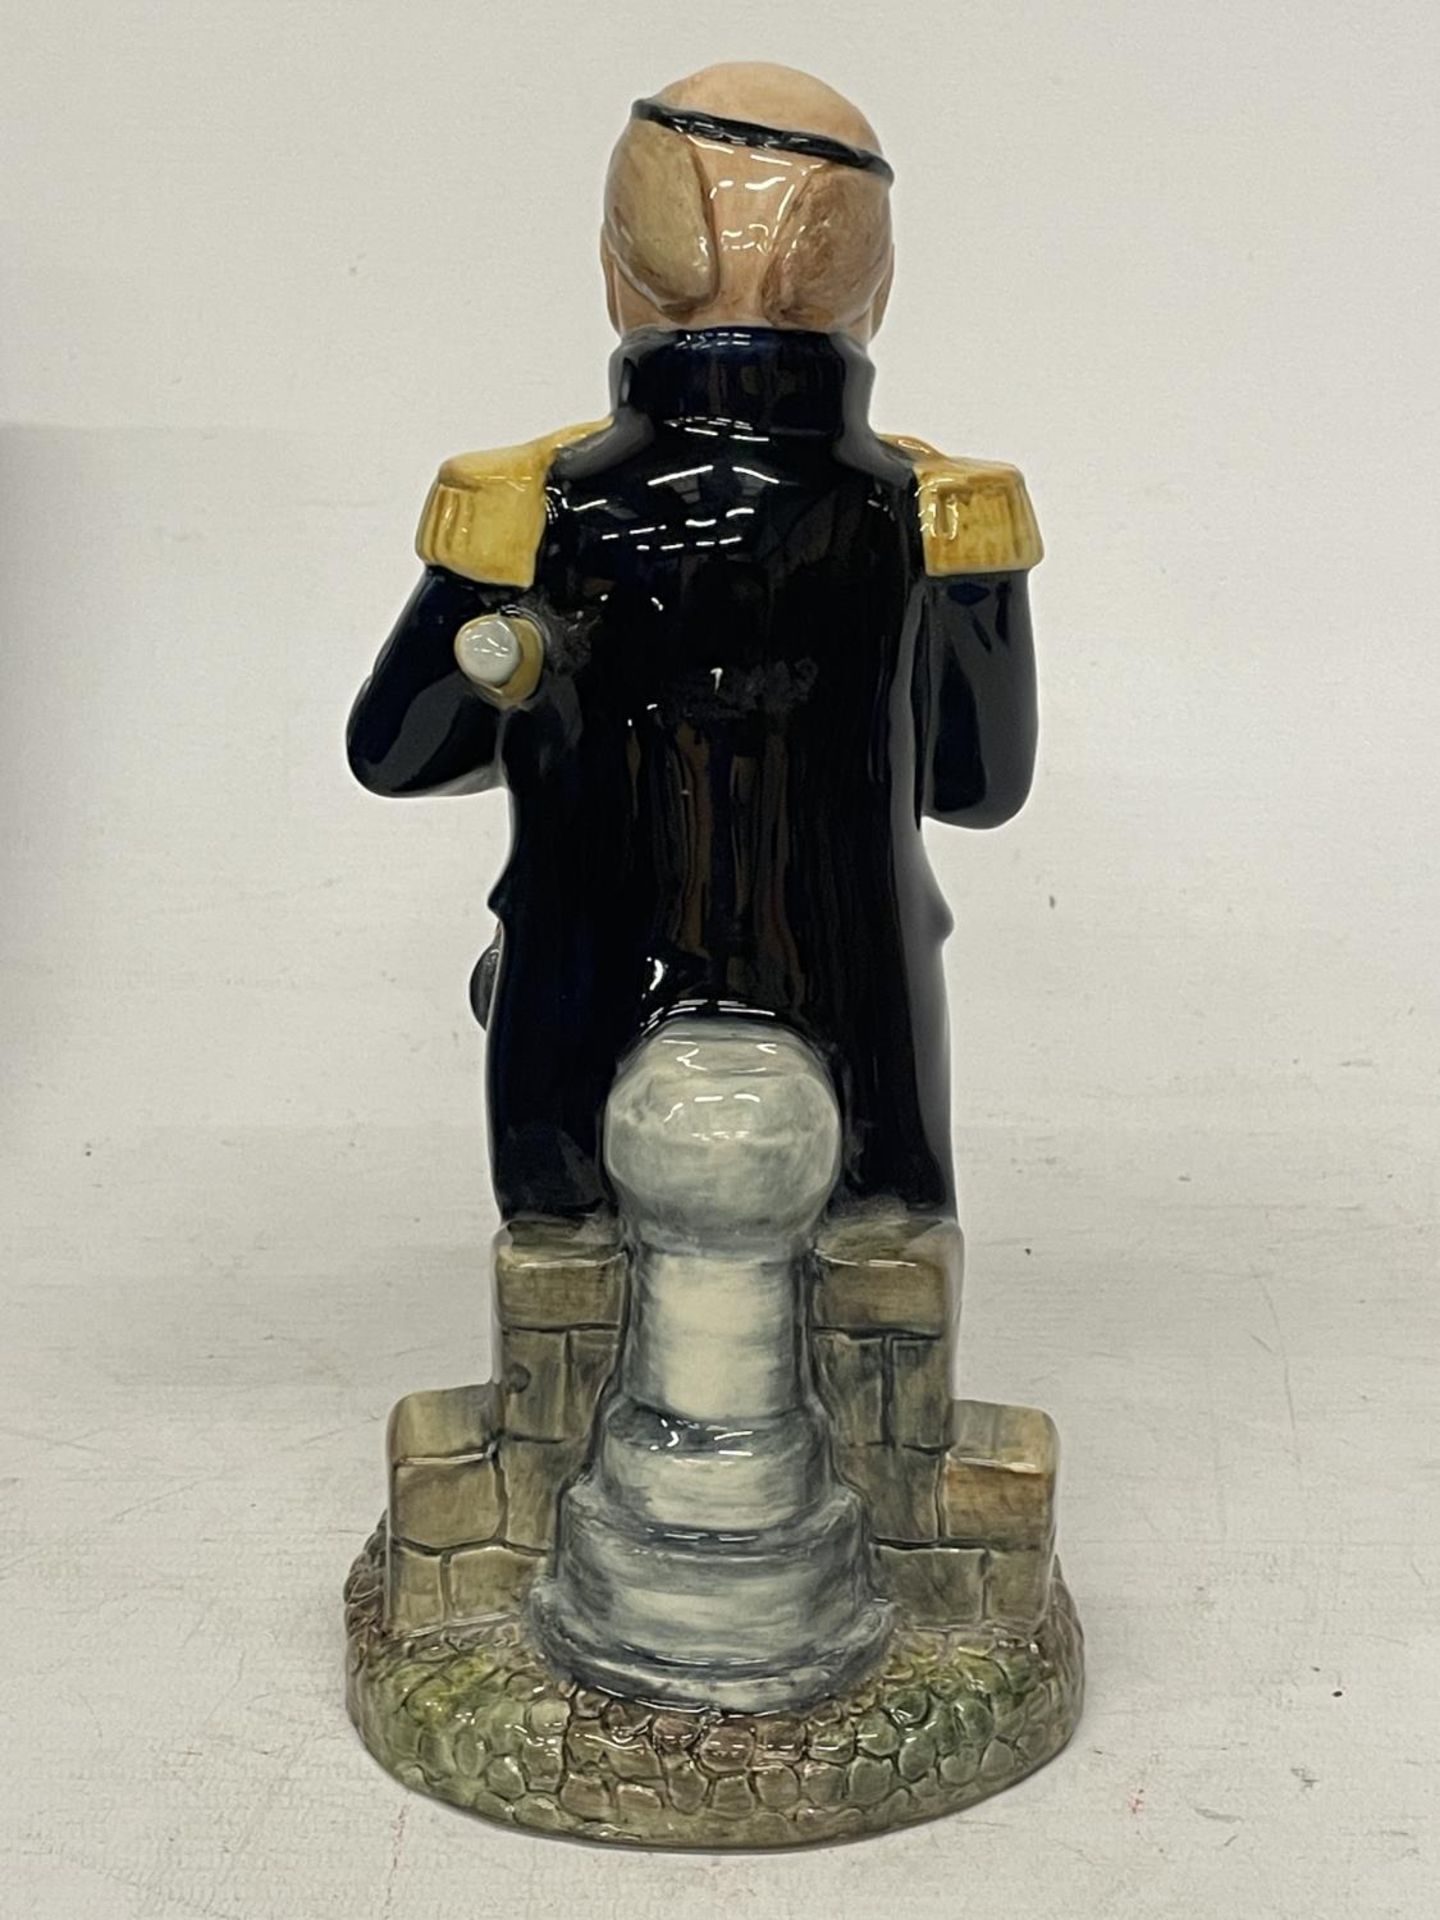 A BAIRSTOW POTTERY WINSTON CHURCHILL FIGURE "FIRST SEA LORD" - LIMITED EDITION NO. 16 - Image 3 of 5